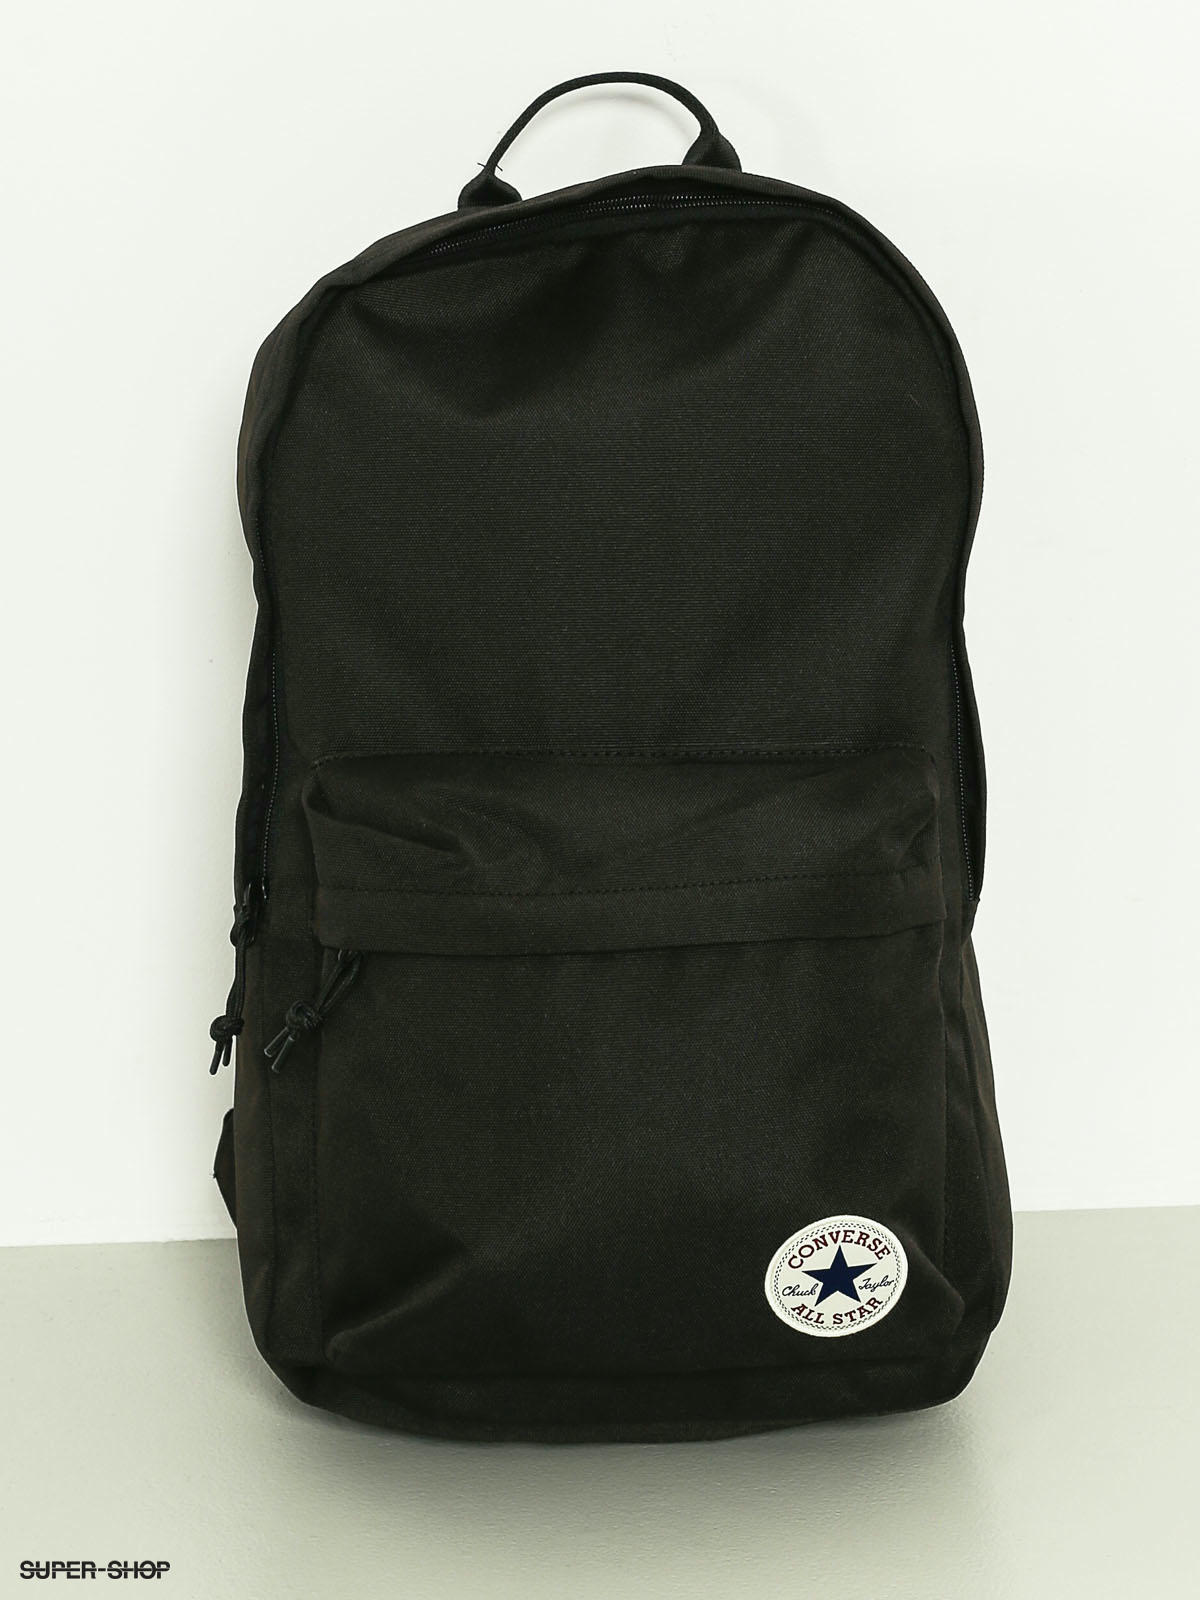 converse edc poly backpack